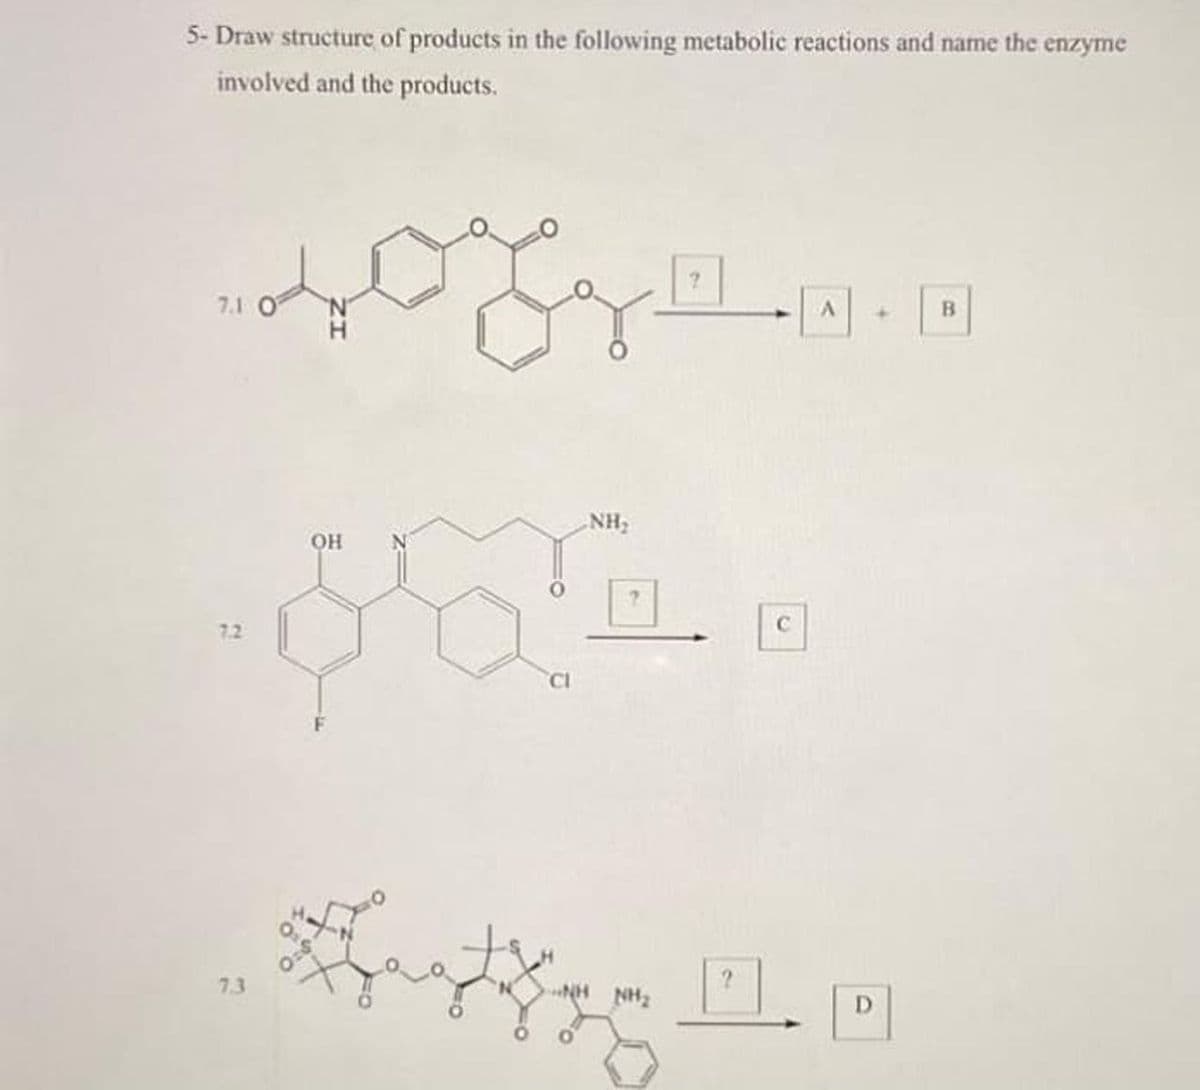 5- Draw structure of products in the following metabolic reactions and name the enzyme
involved and the products.
7.1 O
H.
NH2
он
7.2
OR
O:
7.3
HN
NH2
D
